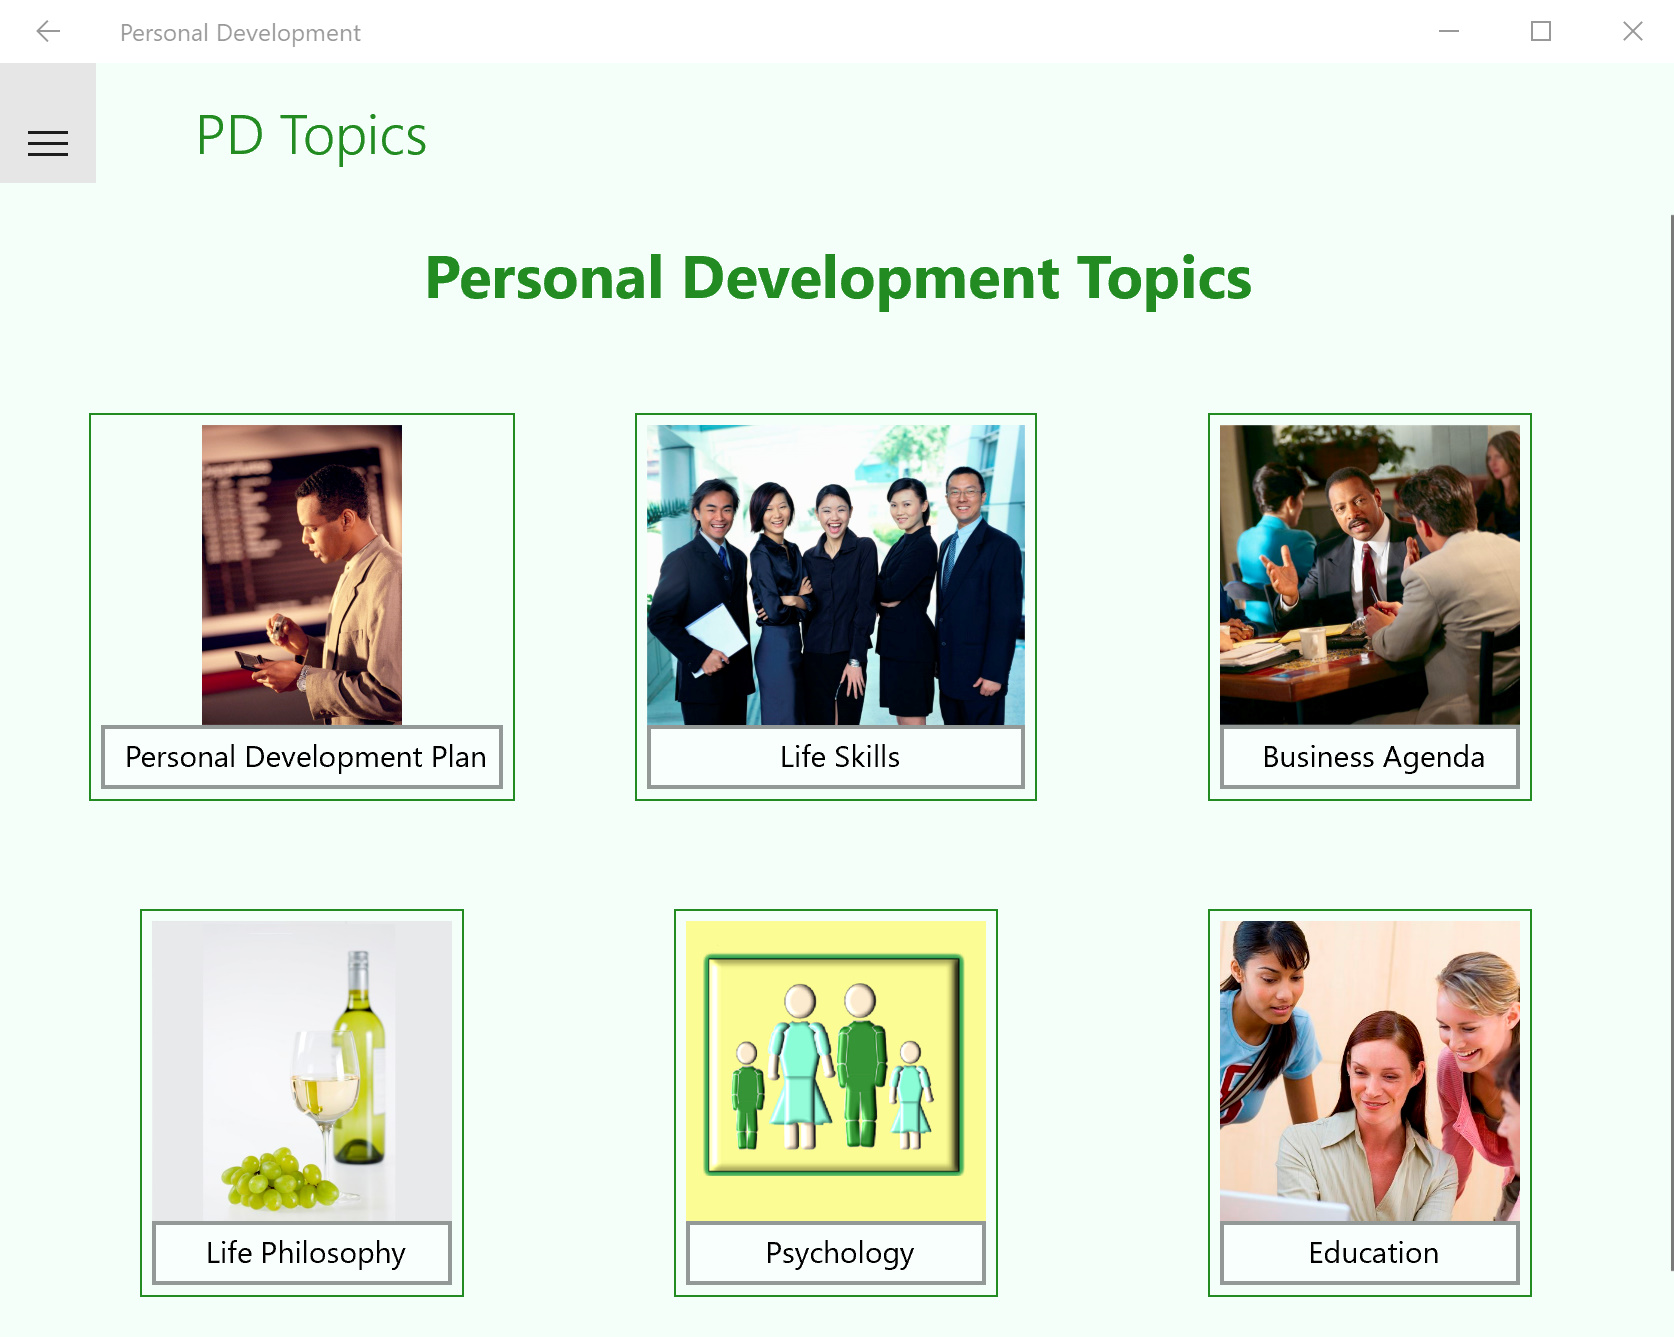 A screen shot of a page from the Personal Development App